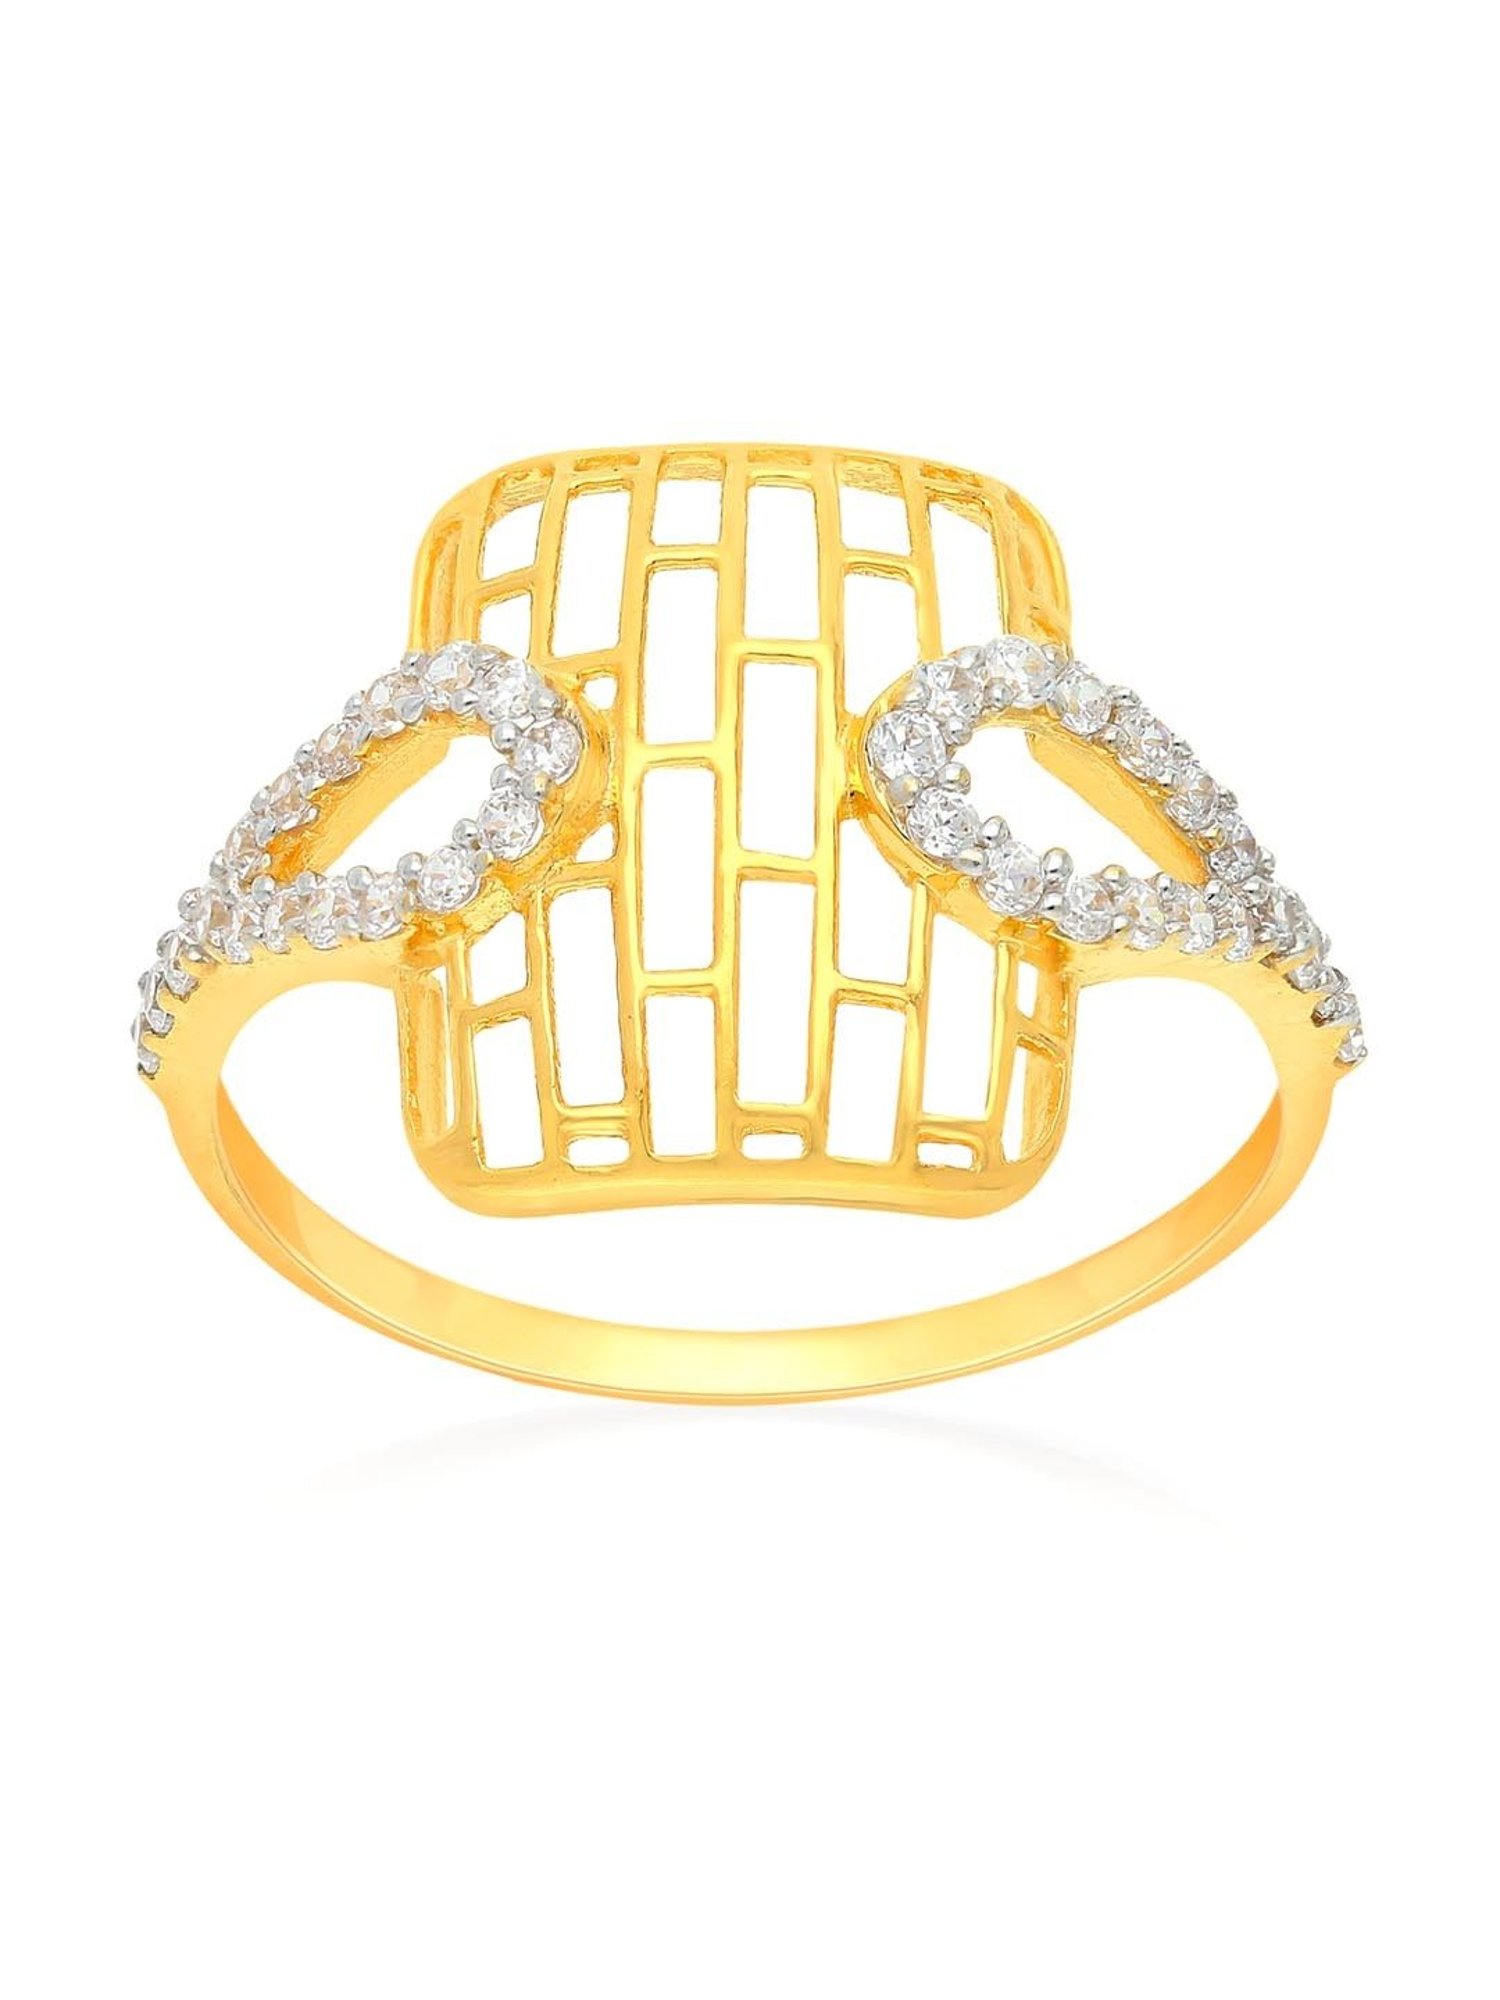 Gold Plated Floral Diamond Stone Toe Rings | Gold toe rings, Toe ring  designs, Toe rings